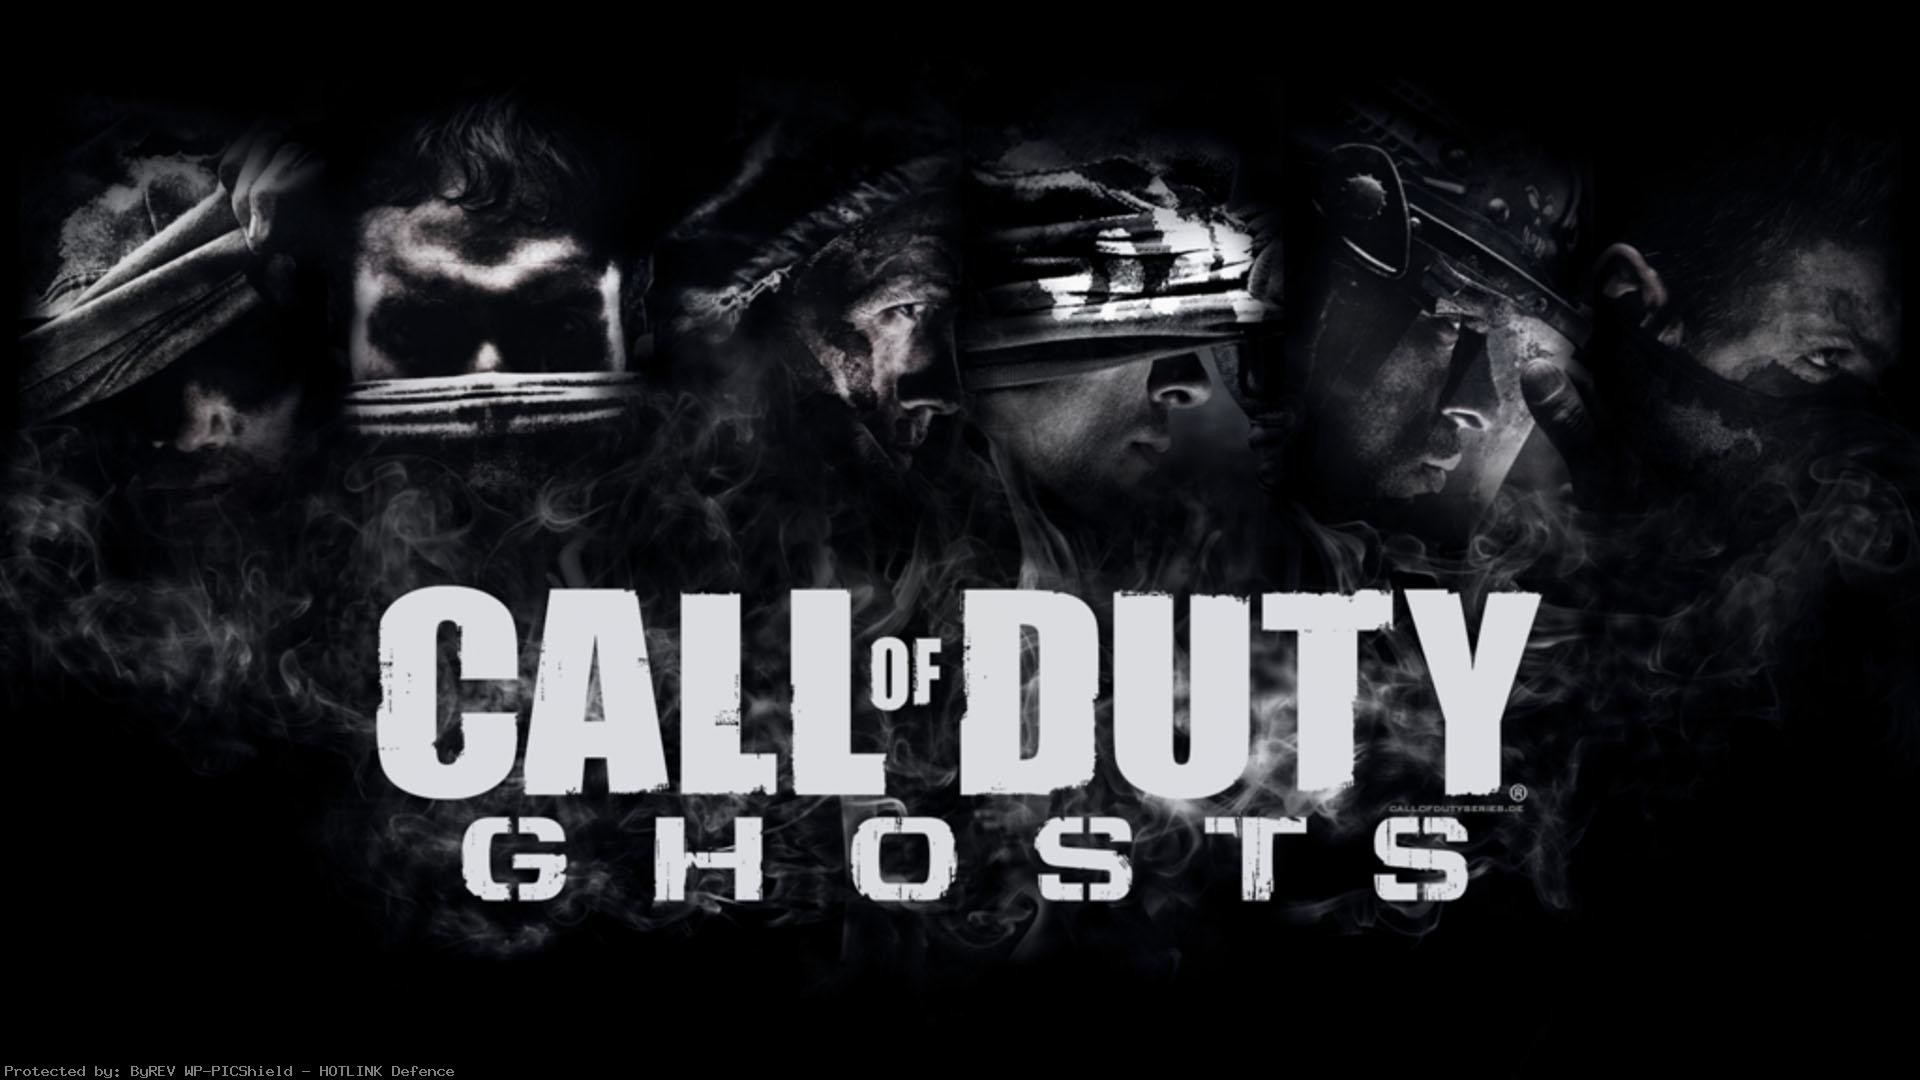 Call of duty ghosts Pesquisa Google wallpaper wp6004025